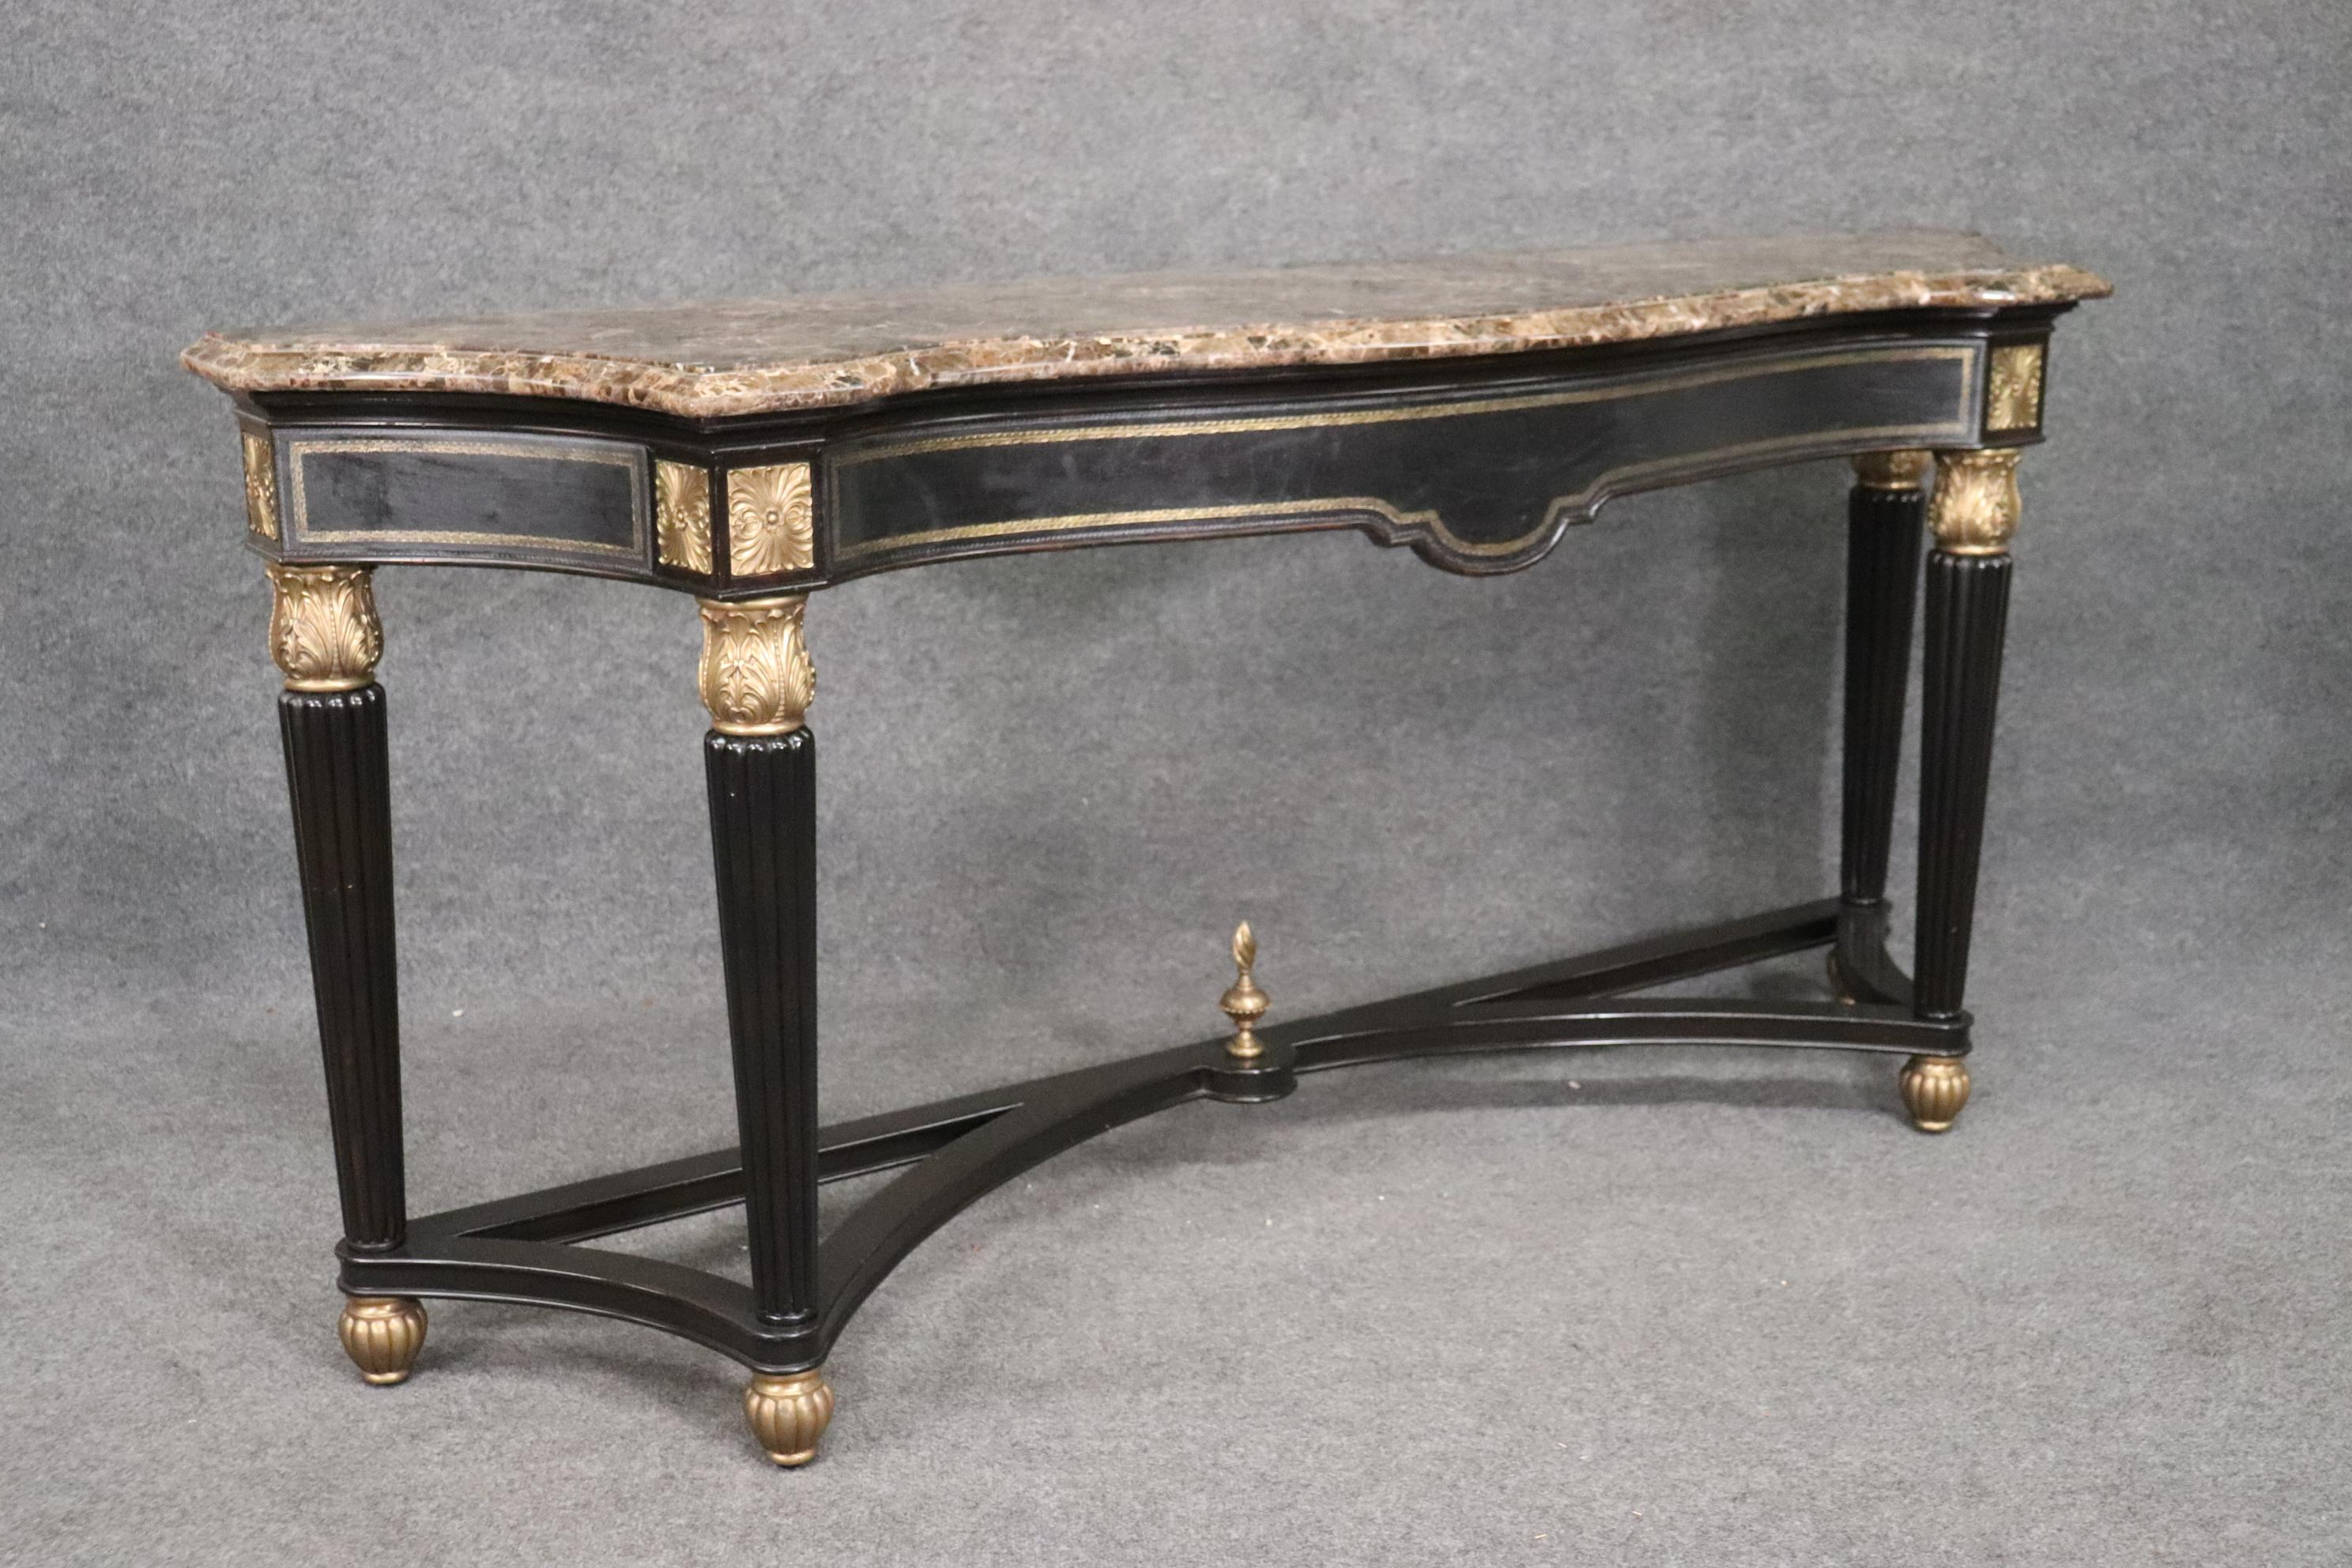 This is a gorgeous console table witrh fantastic quality bronze ormolu and a great slab of marble on top. The ebonized frame of the table is in good condition as is the rest of the table. The table measures 78 wide x 20 deep x 36 tall and dates to